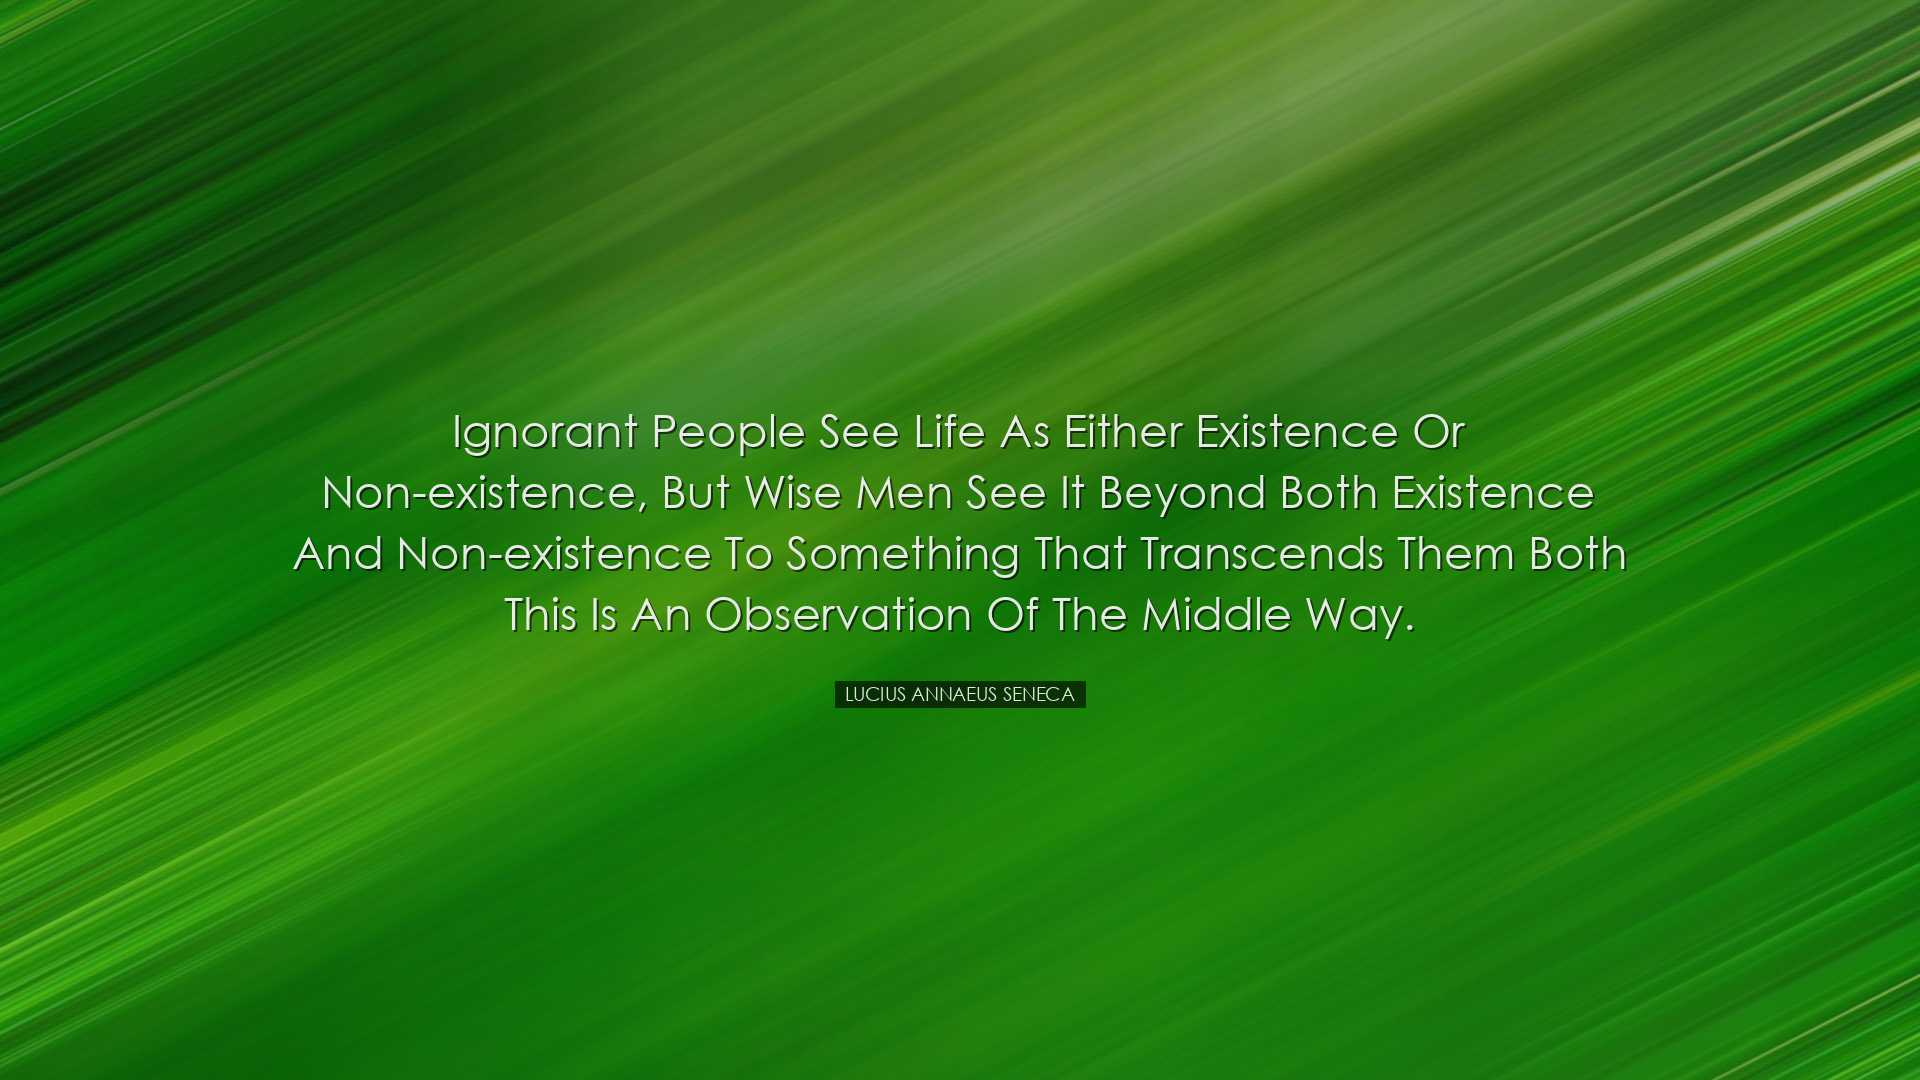 Ignorant people see life as either existence or non-existence, but